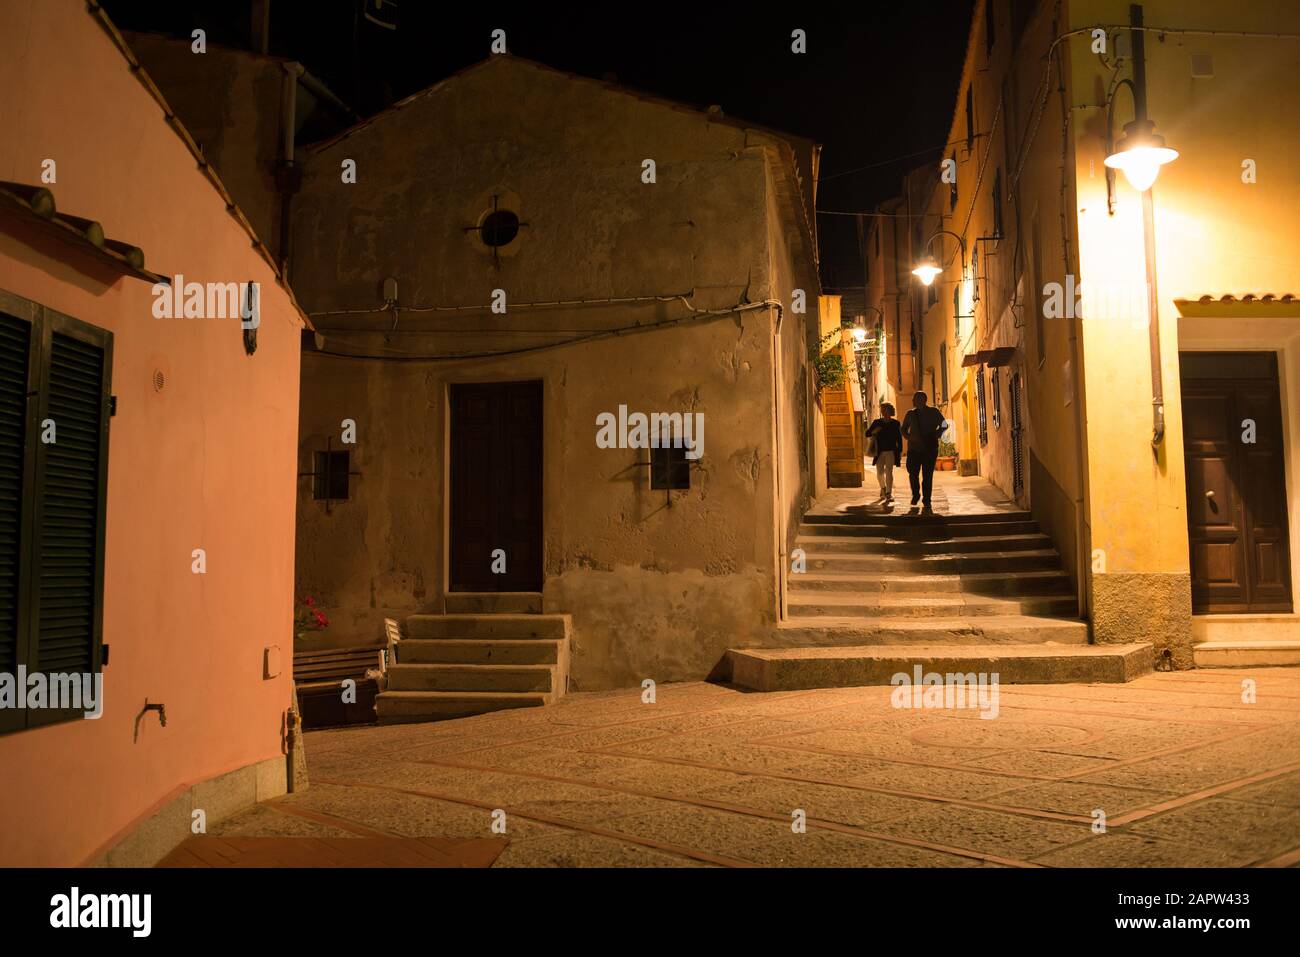 View of classic small alley in historic medieval Italian town at night with couple silhouettes walking Stock Photo